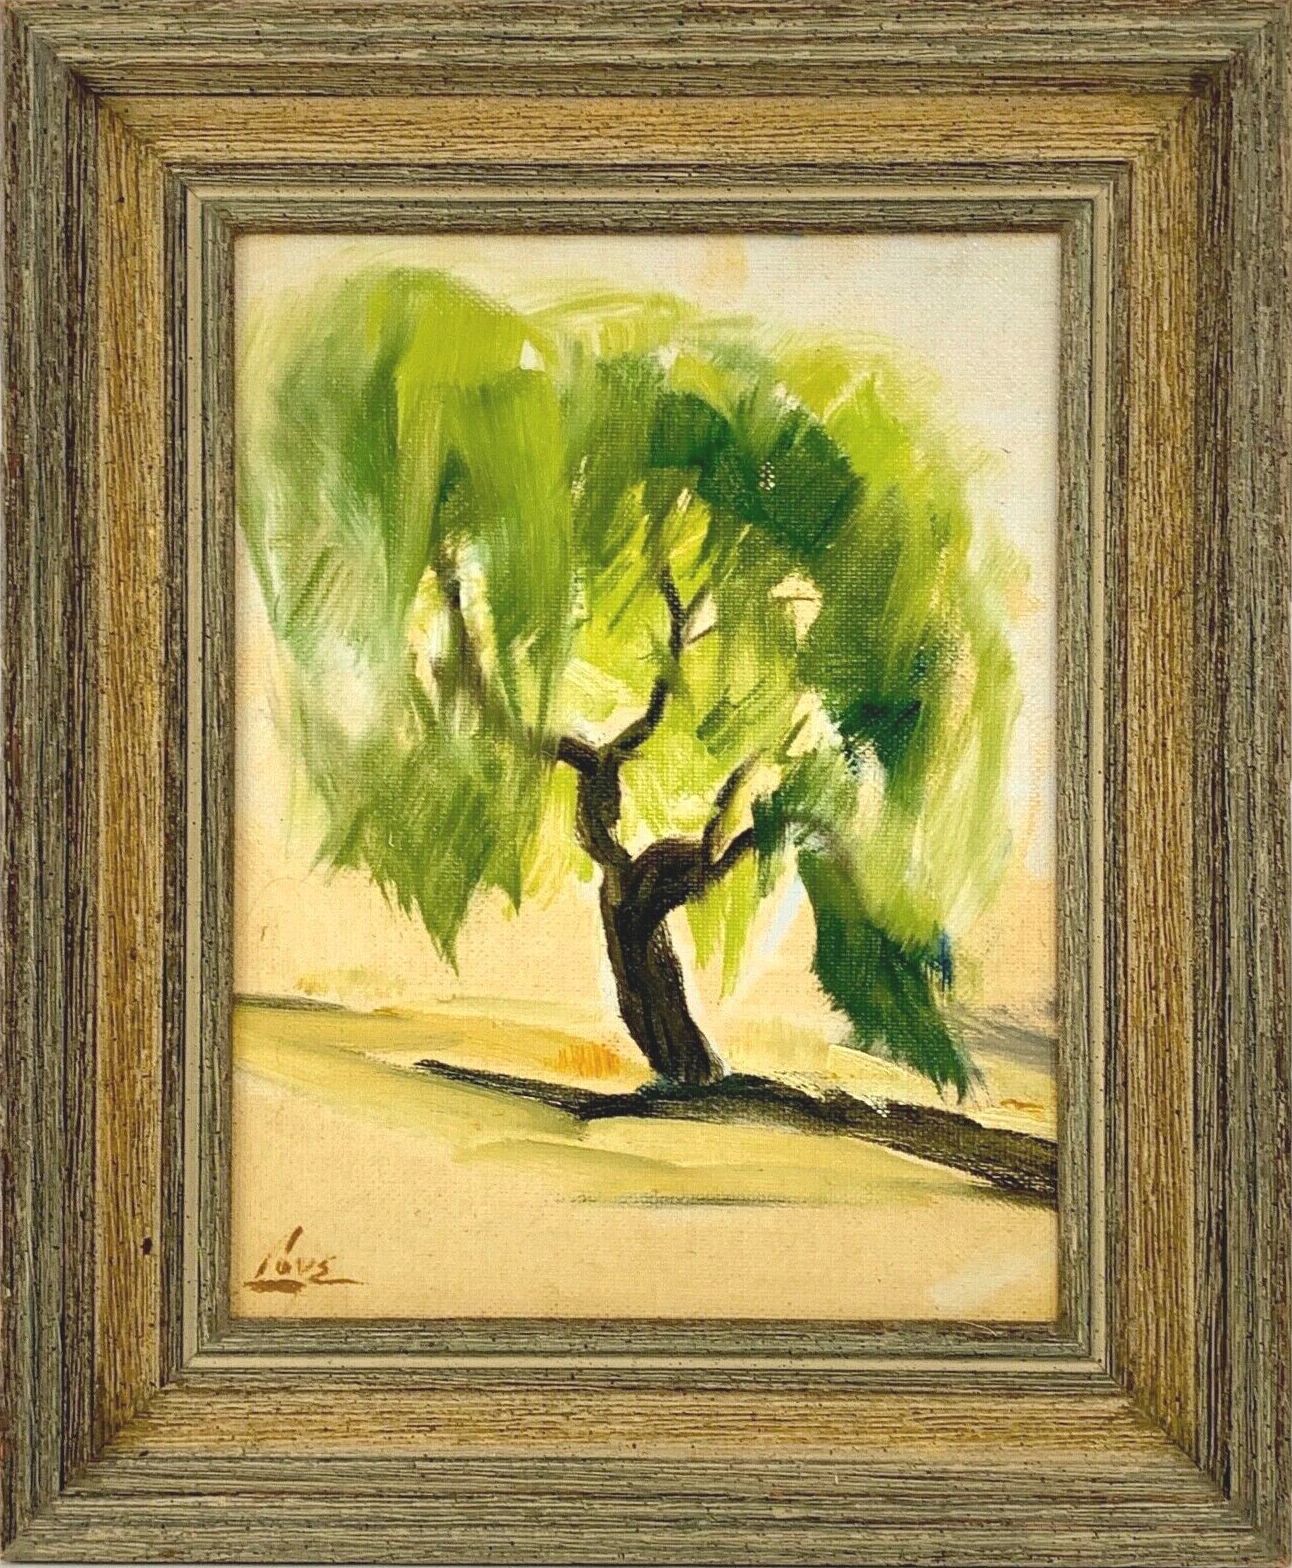 Ralph Love - Untitled (Willow) 8.5" x 6.5"